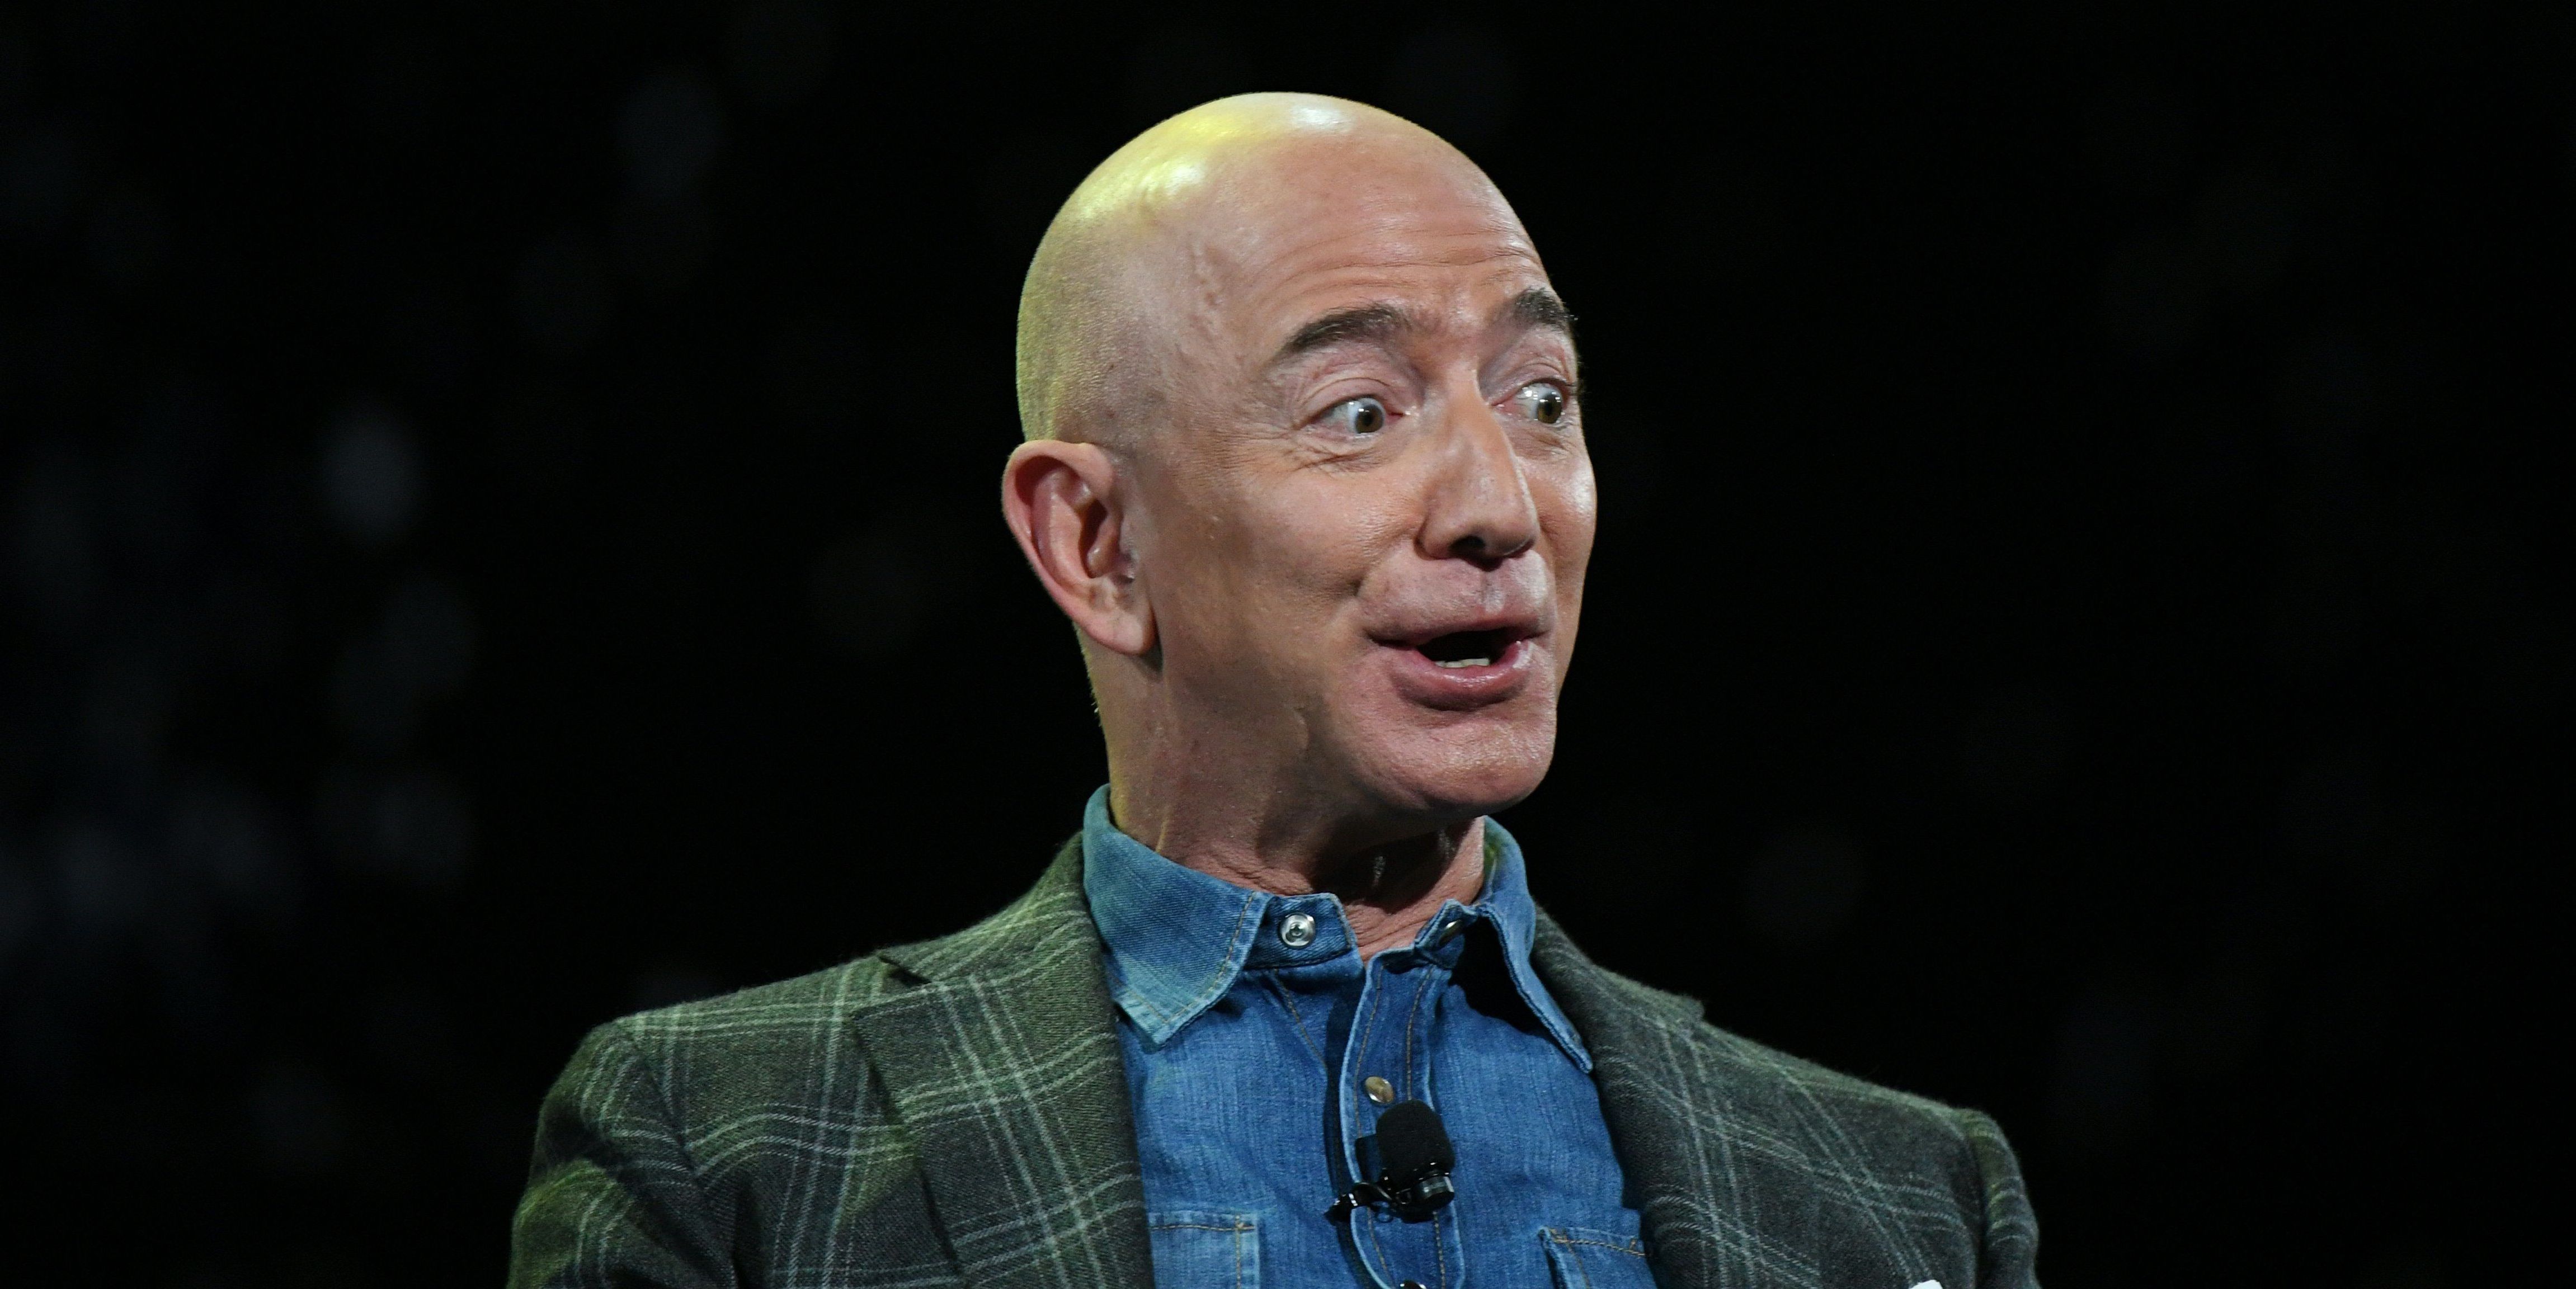 Jeff Bezos Is Funding a Company To Cheat Death